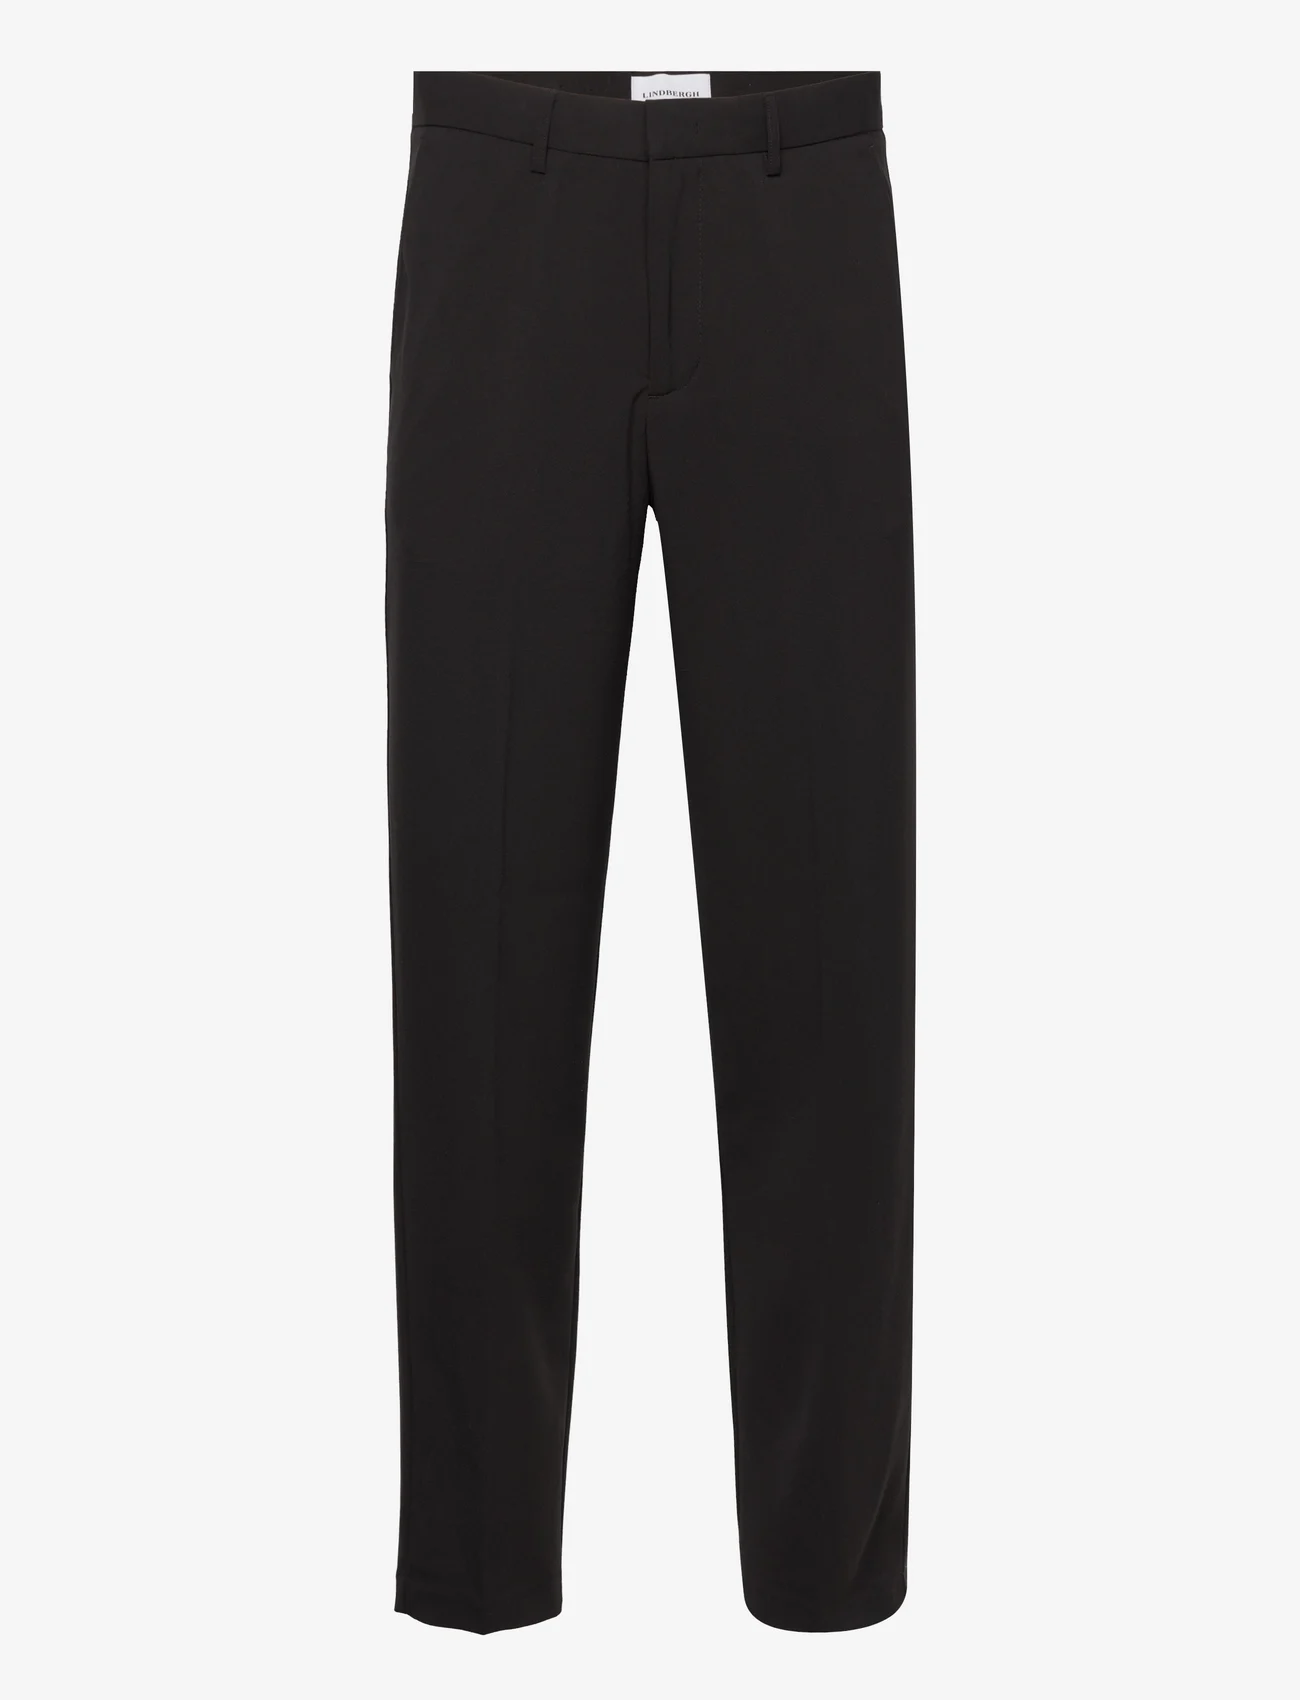 Lindbergh - Relaxed fit formal pants - kostymbyxor - black - 0